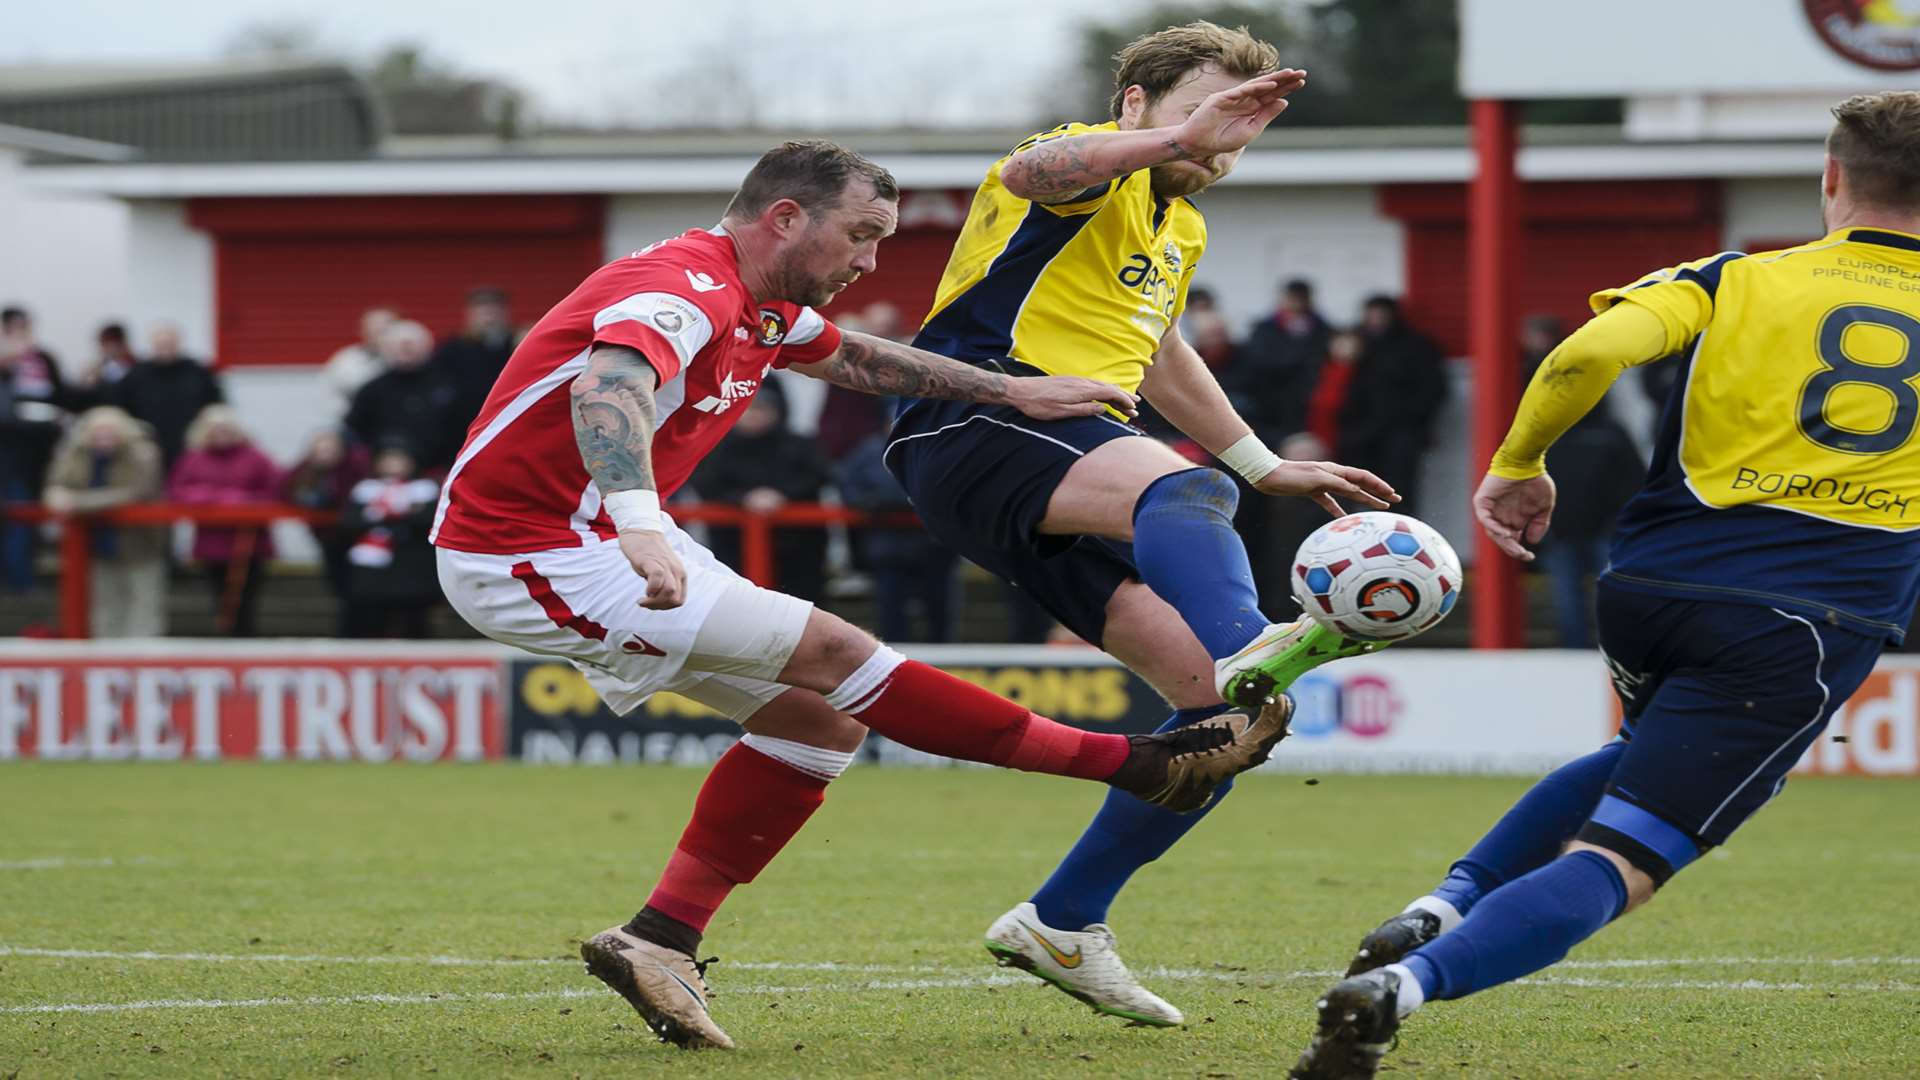 Danny Kedwell battles for possession during Ebbsfleet's win over Gosport Picture: Andy Payton